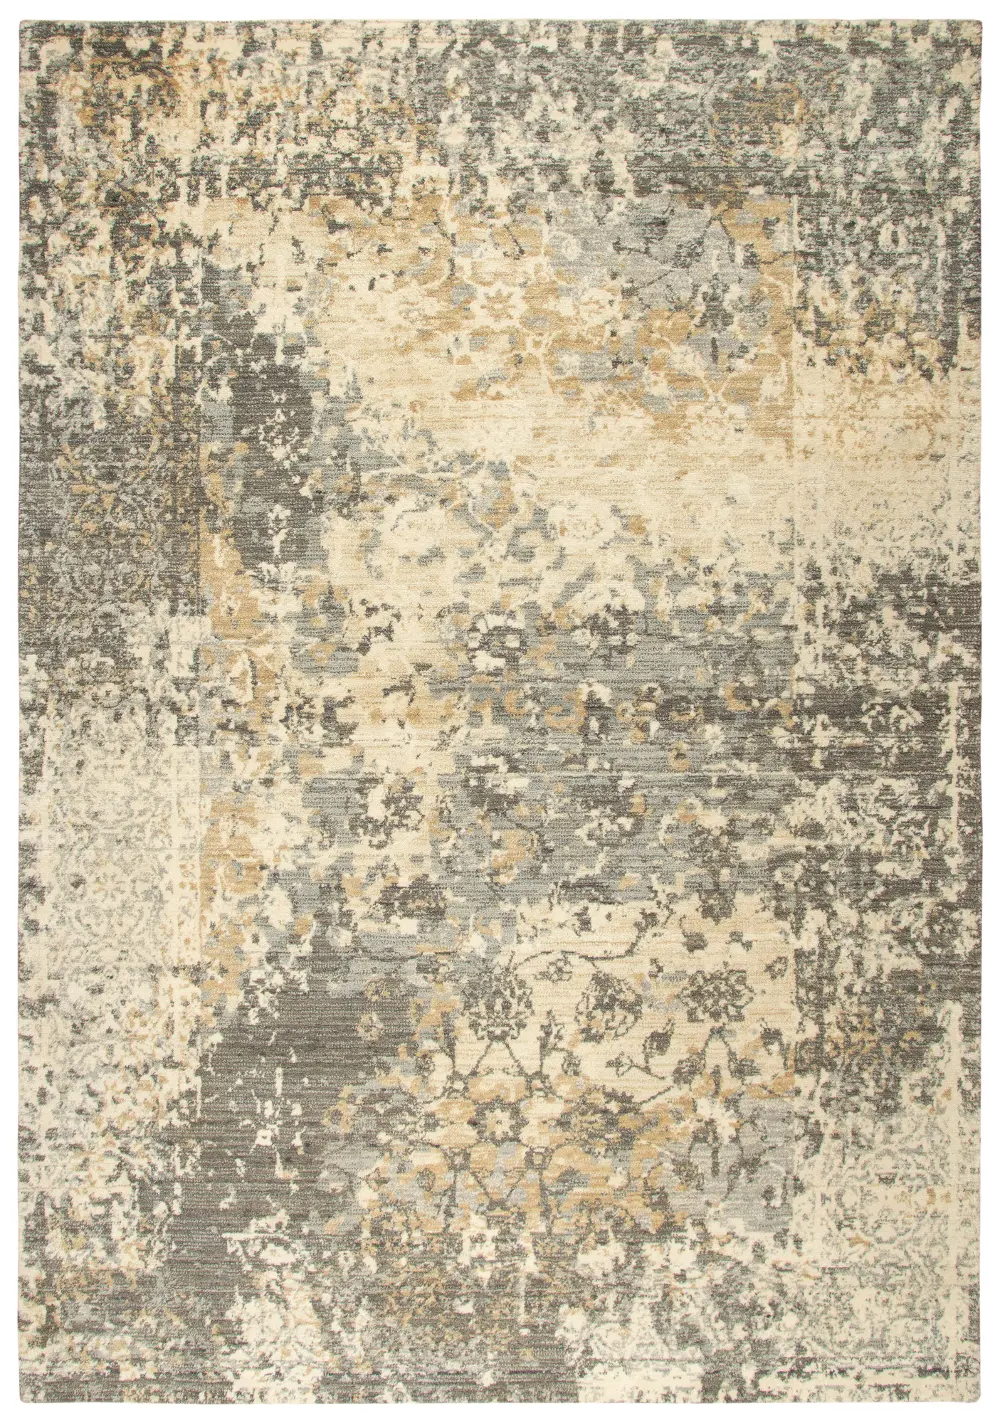 8 x 10 Large Gray, Beige, and Gold Area Rug - Gossamer-1